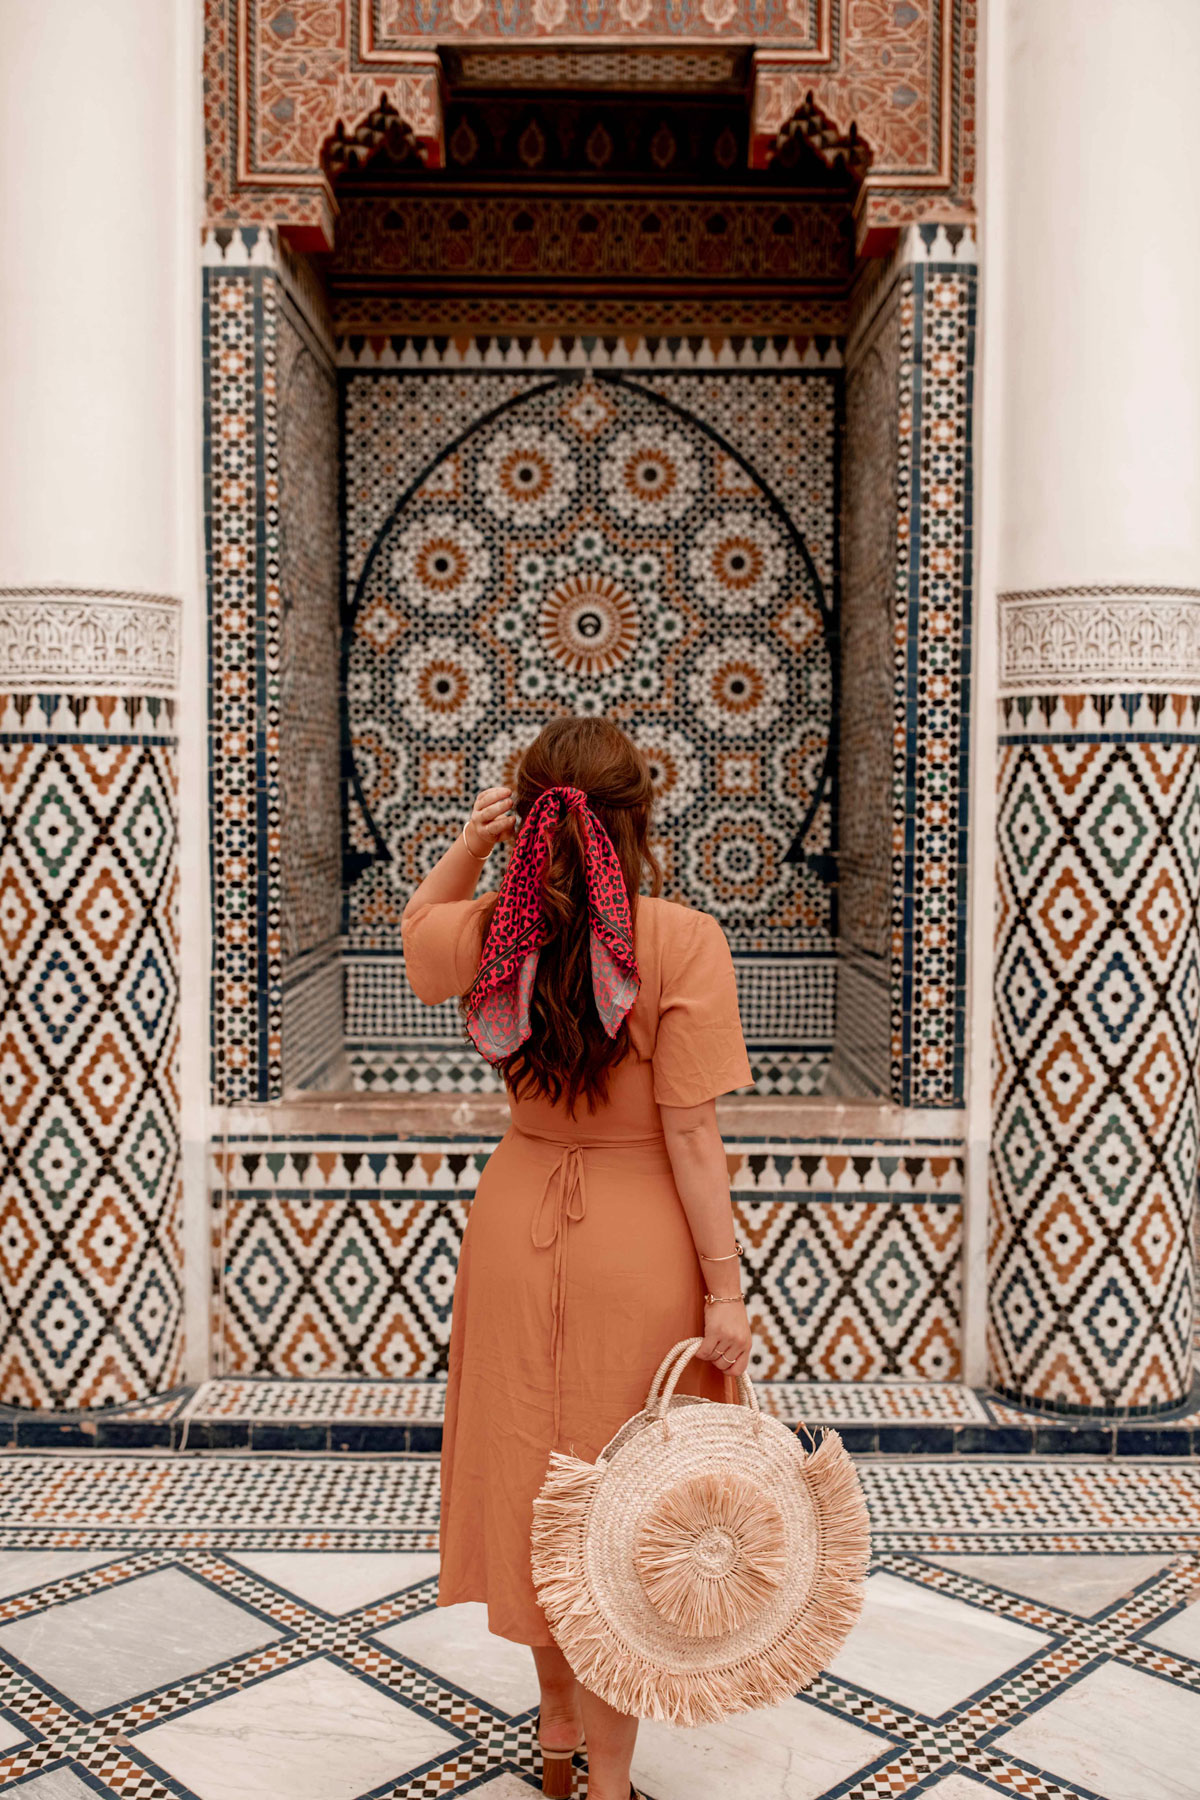 Top-things-to-do-in-marrakech-Bucket-list-kelseyinlondon-Kelsey-Heinrichs--What-to-do-in-marrakech--Where-to-go-in-marrakech-top-places-in-marrakech-museum